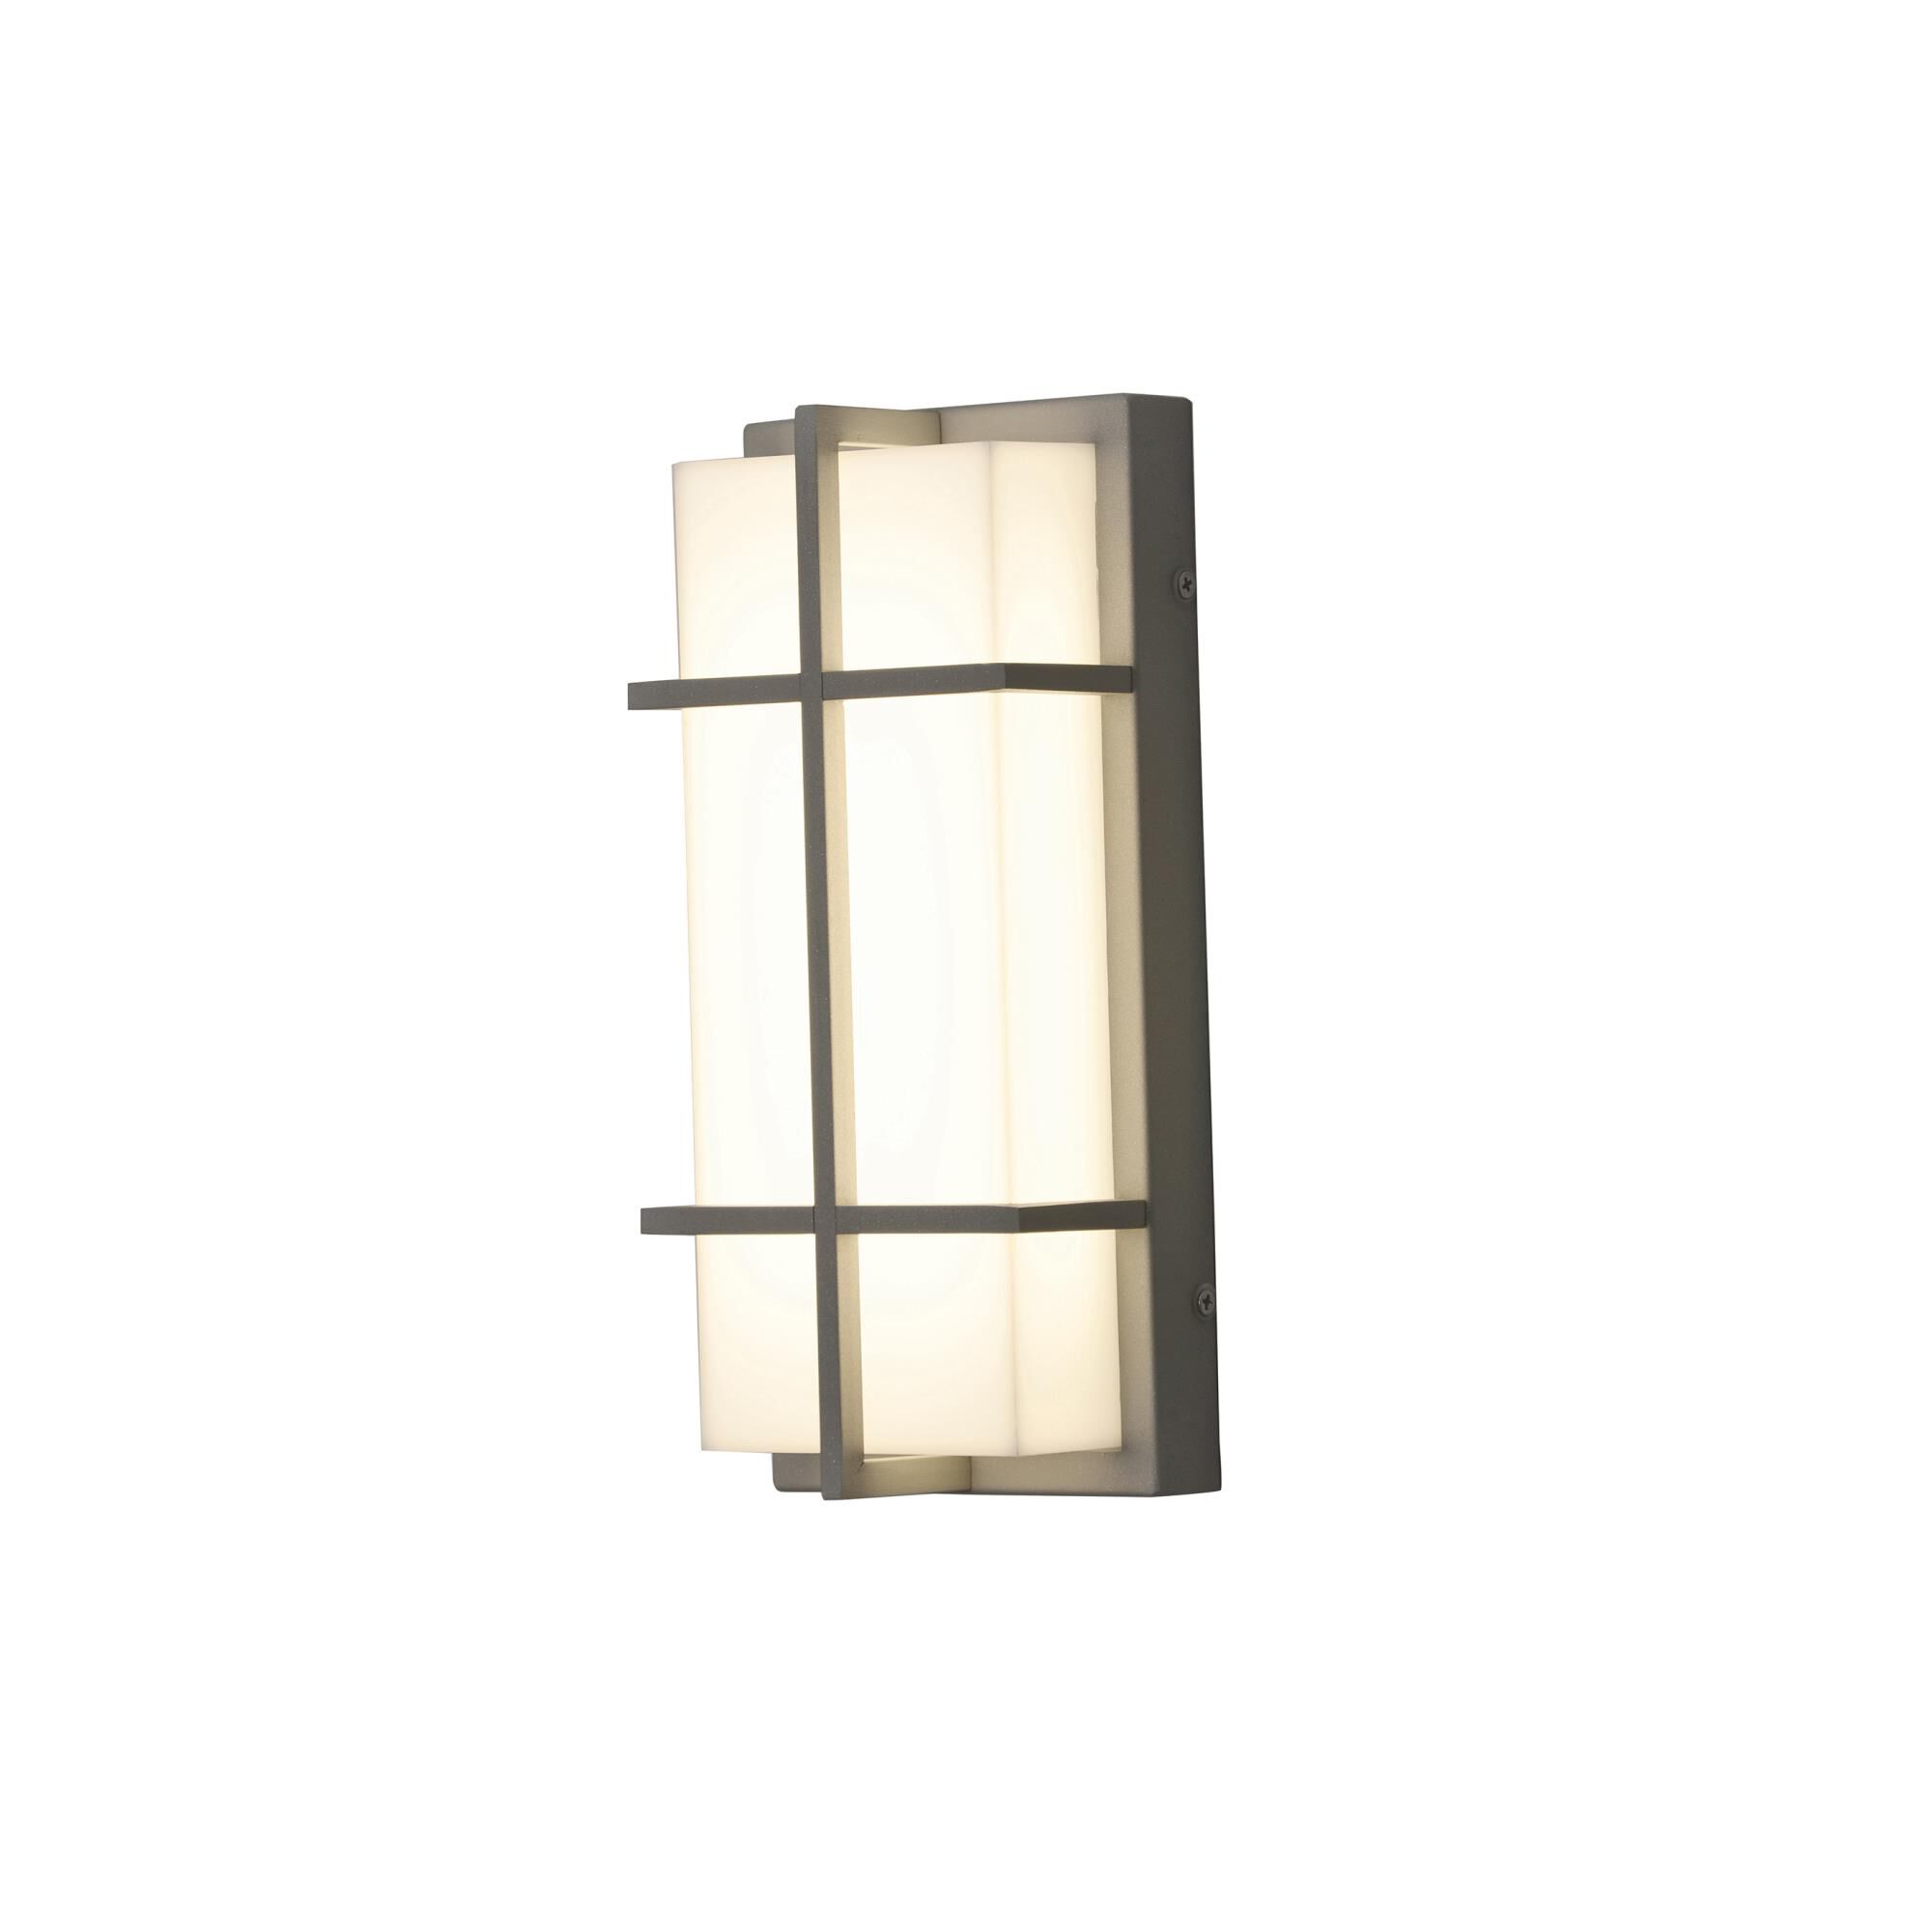 Photos - Chandelier / Lamp AFX Lighting Avenue 12 Inch Tall LED Outdoor Wall Light Avenue - AUW612250 